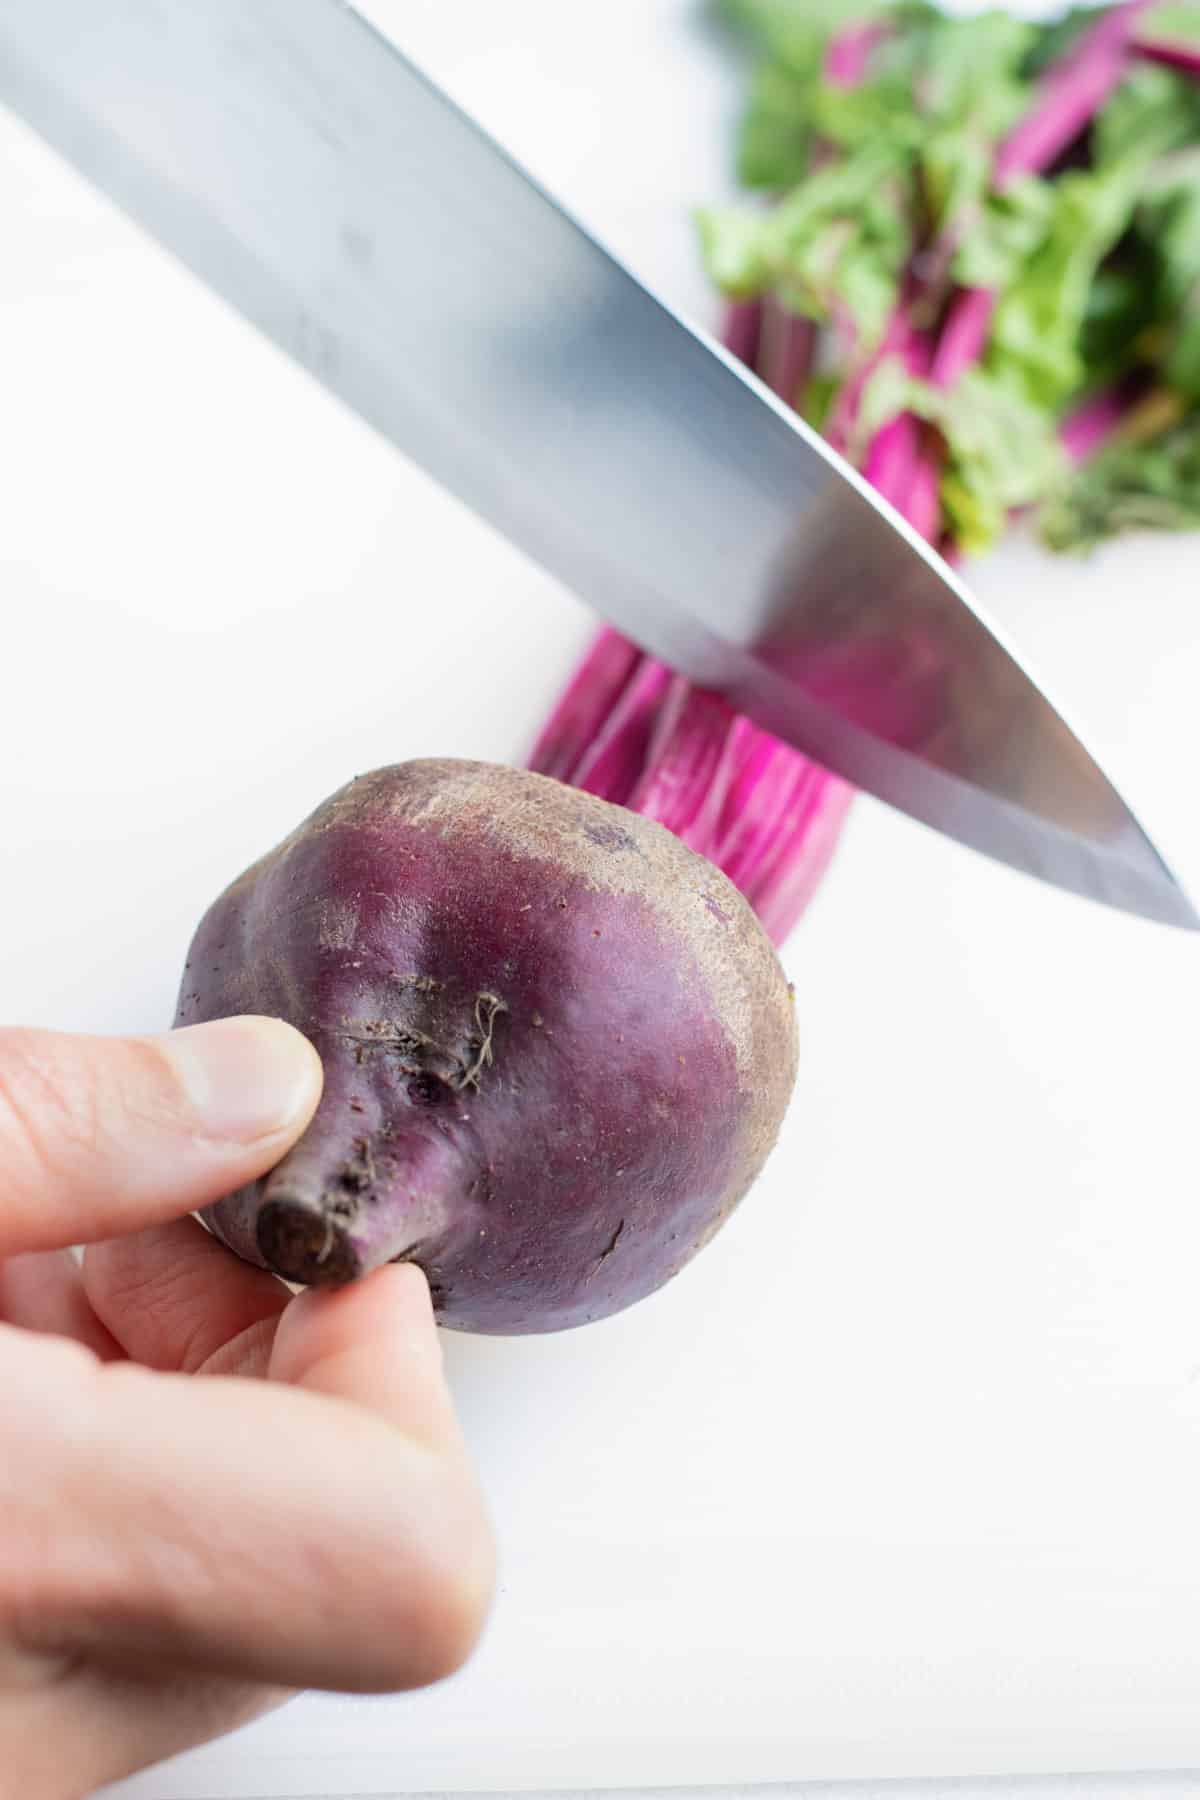 The stem is chopped off the whole beet.